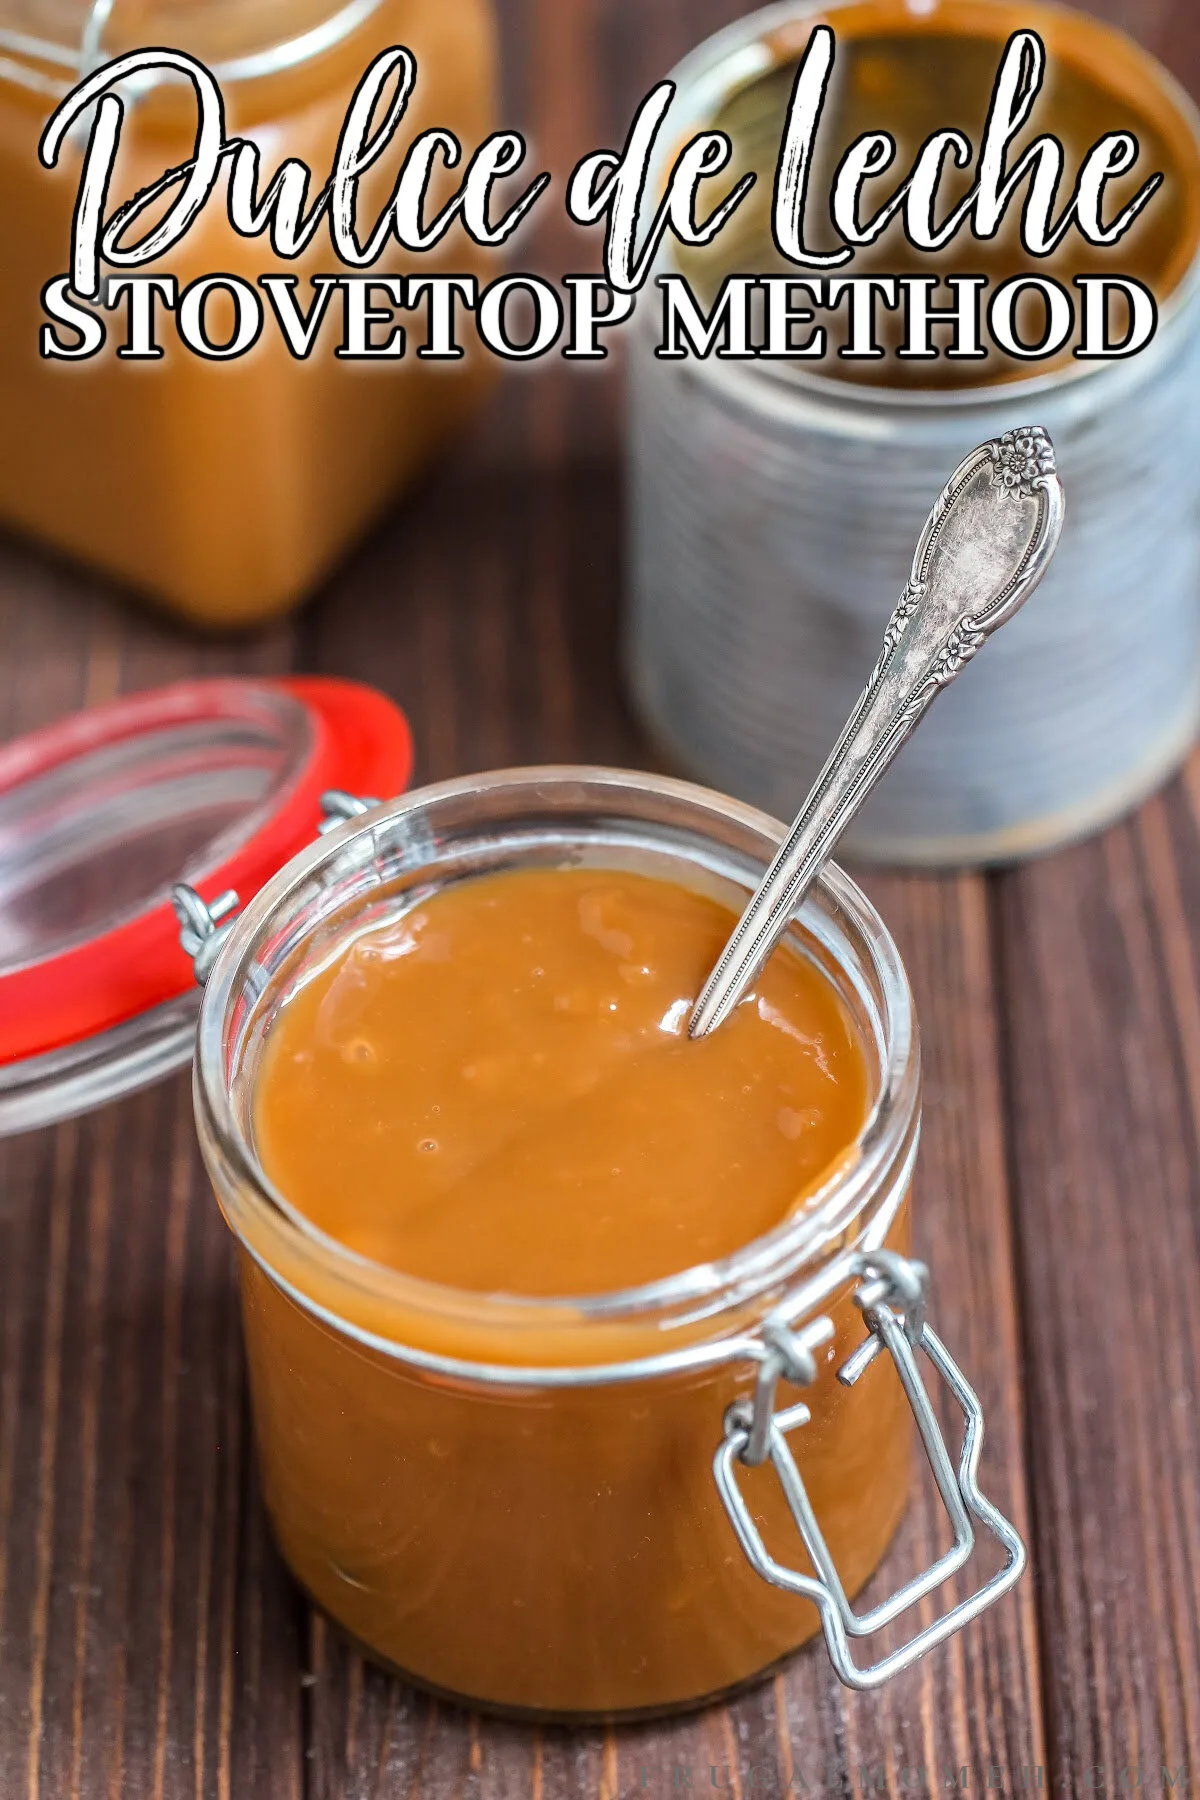 Find out how to make your own delicious dulce de leche using condensed milk with this easy recipe. You'll be licking your spoon in no time!